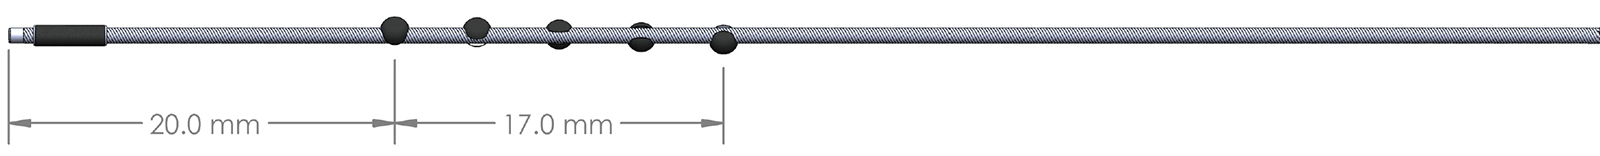 FreedomFlow 5 Fr, 5-sphere driveshaft with dimensions